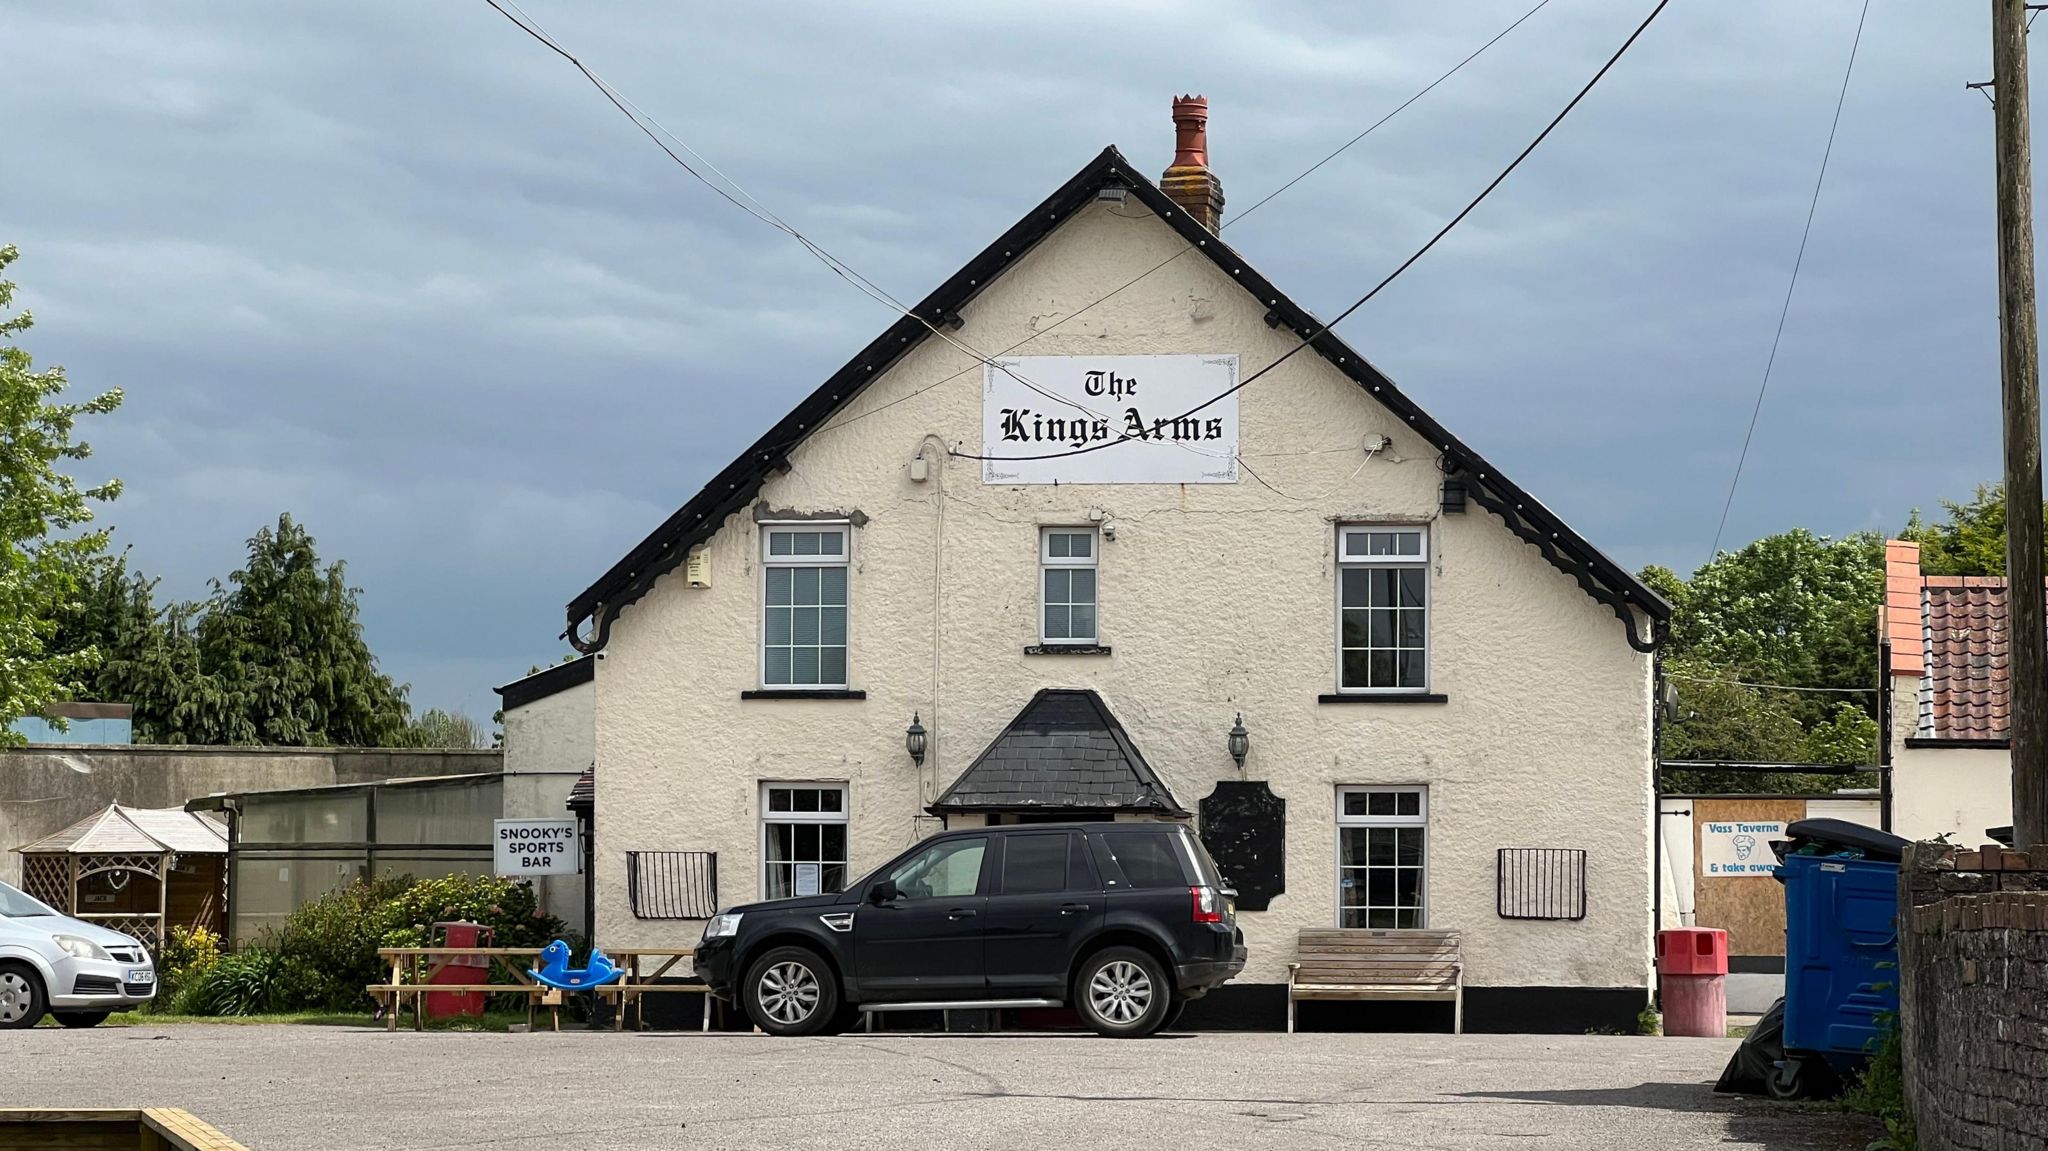 The Kings Arms pub in Pilning seen from the outside